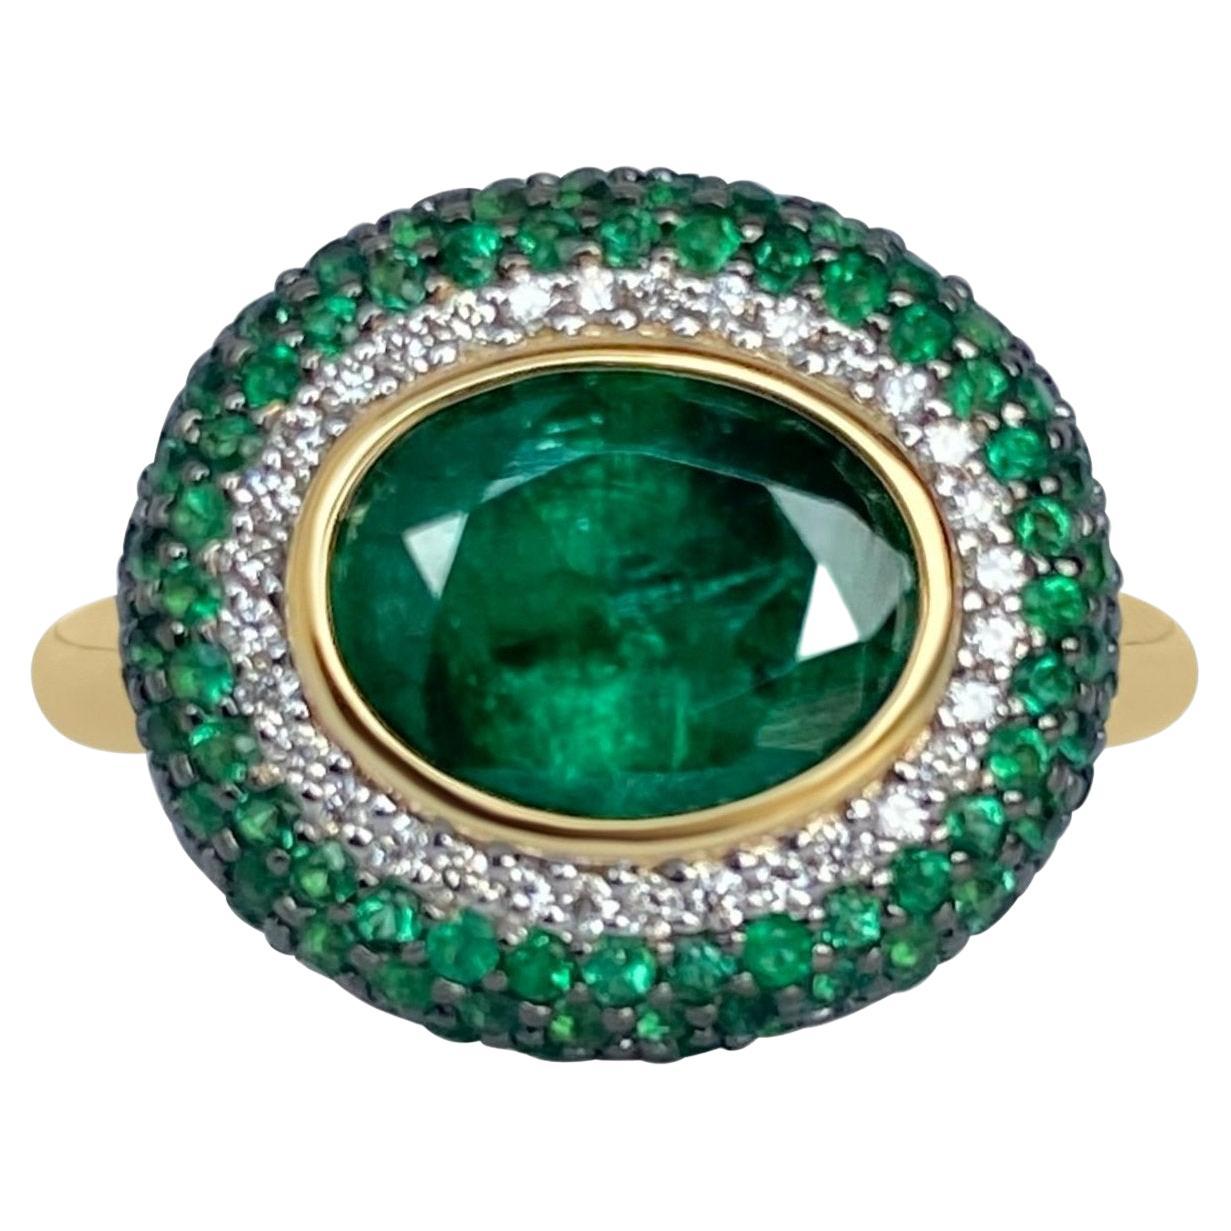 Lotus East West Ring with 2ct Emerald Oval Solitaire, Emerald Petals & Diamonds